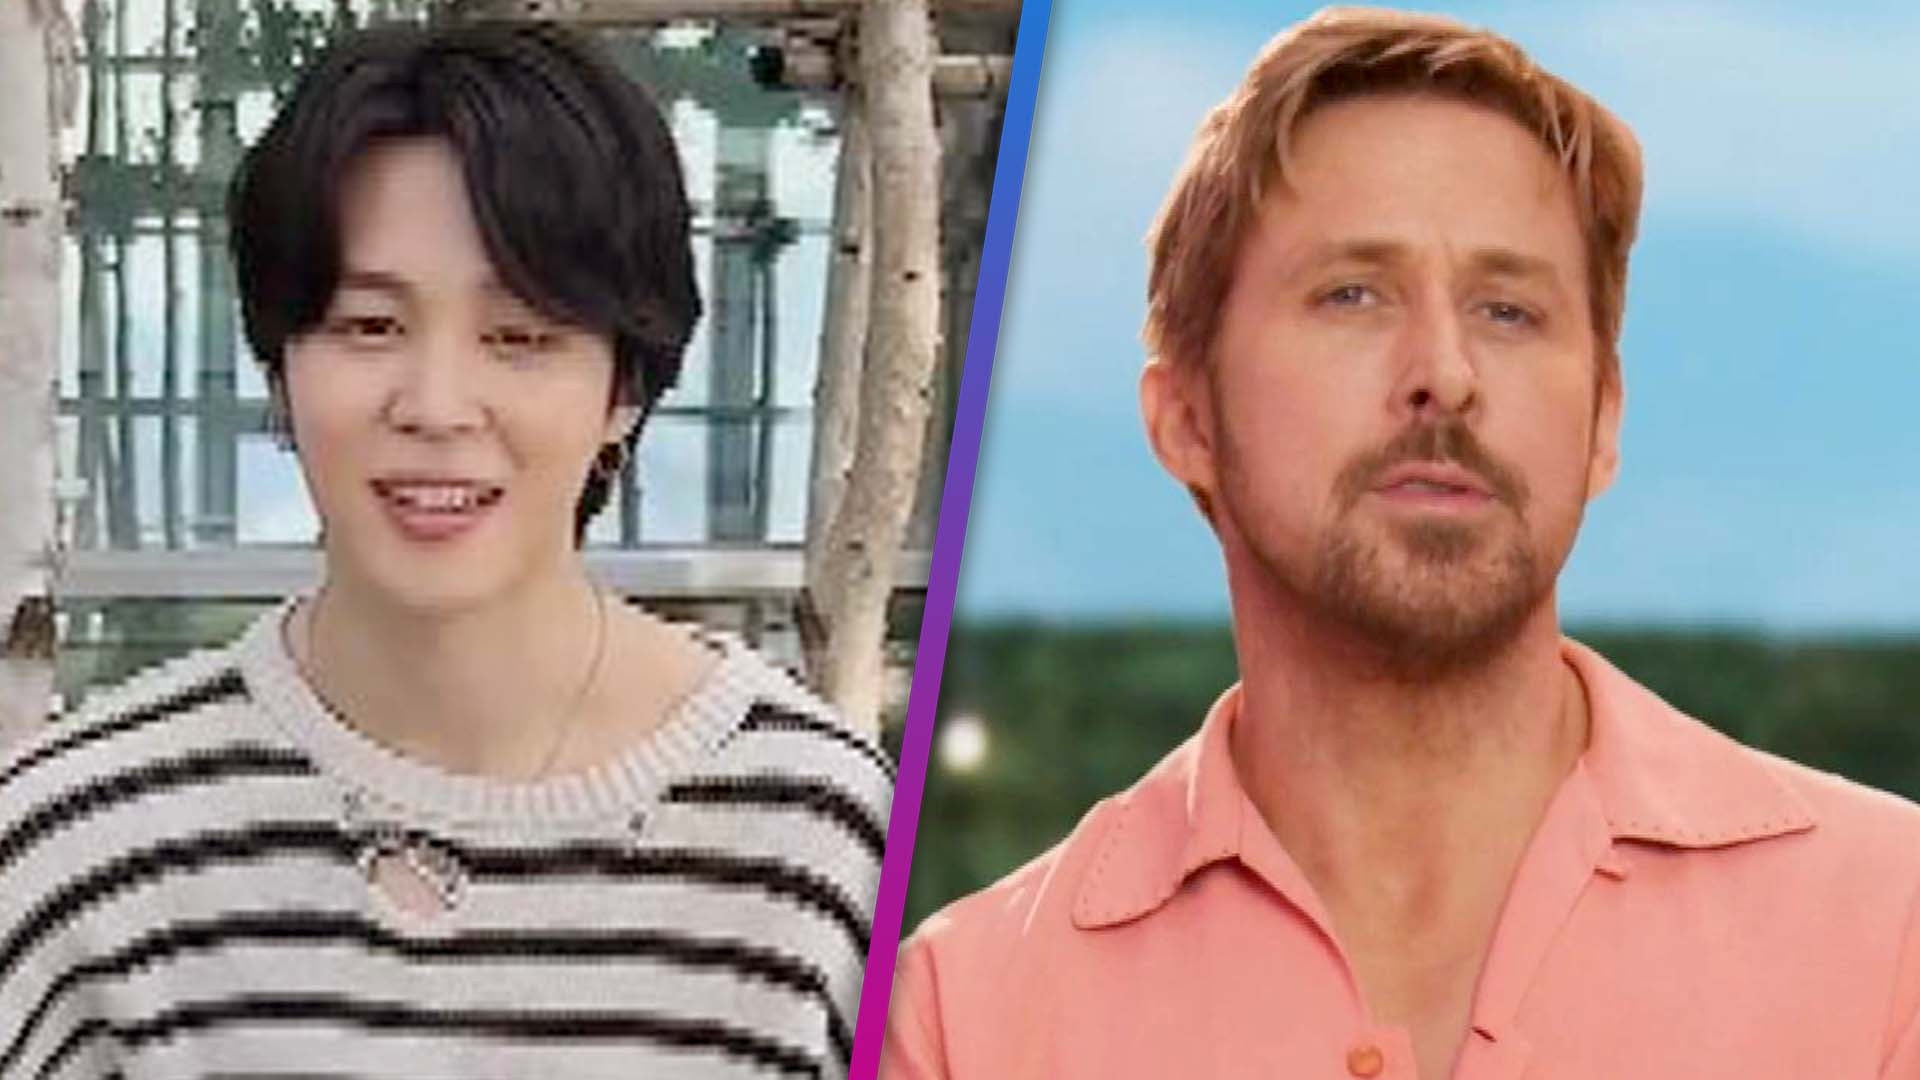 Ryan Gosling Gifts BTS' Jimin a 'Barbie' Guitar After Stealing His Look